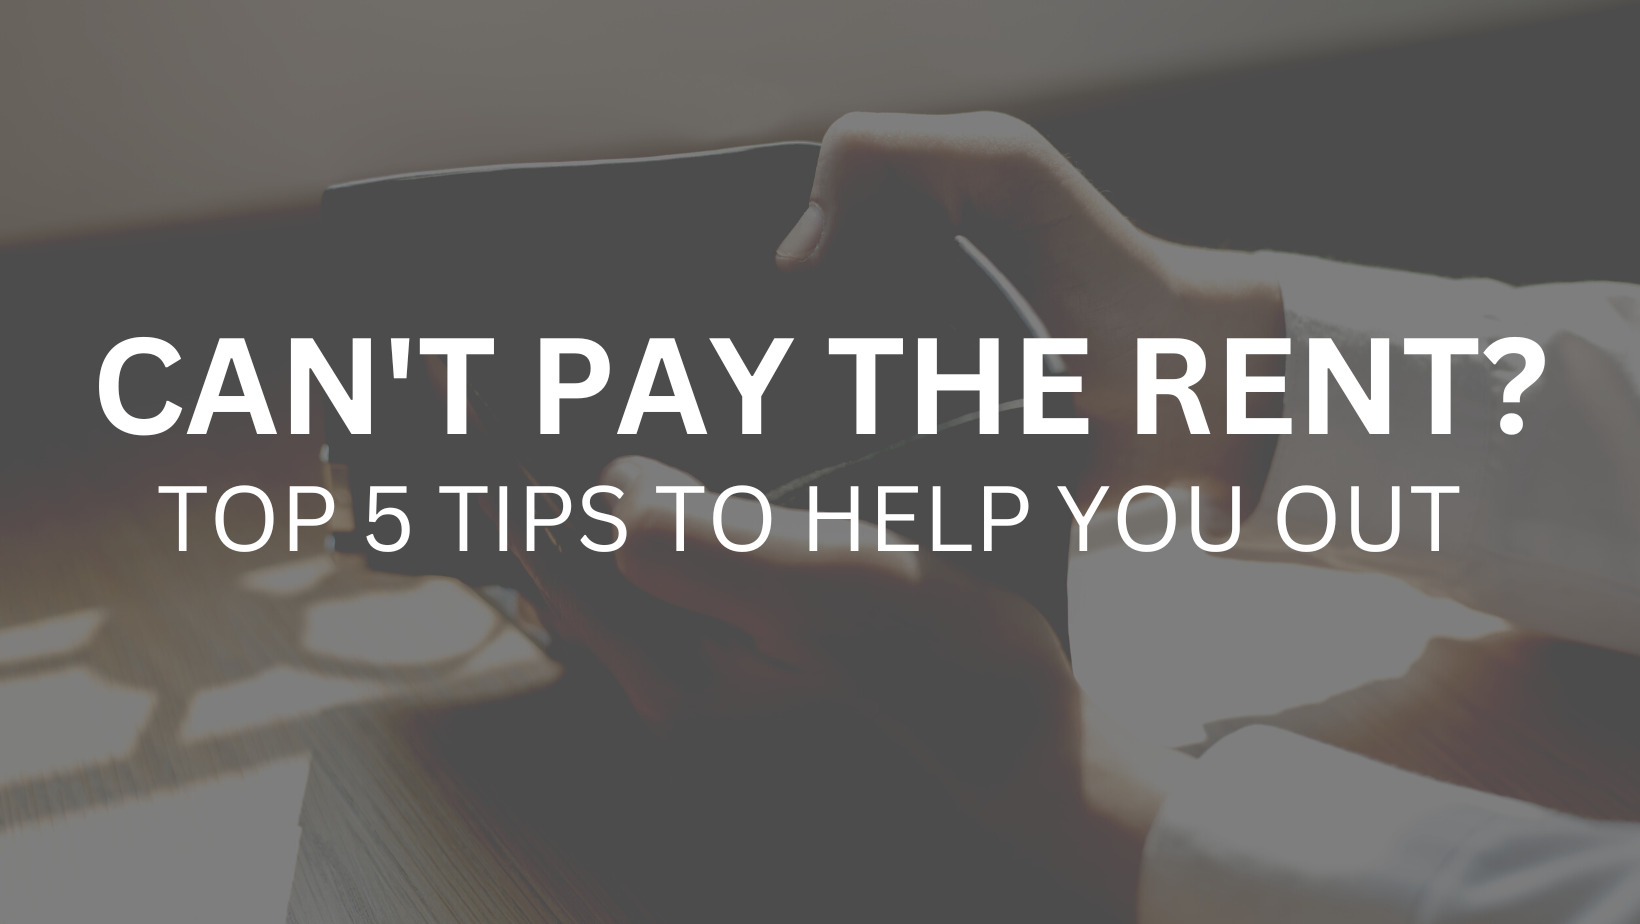 Can’t pay the rent? – 5 tips to help you out!